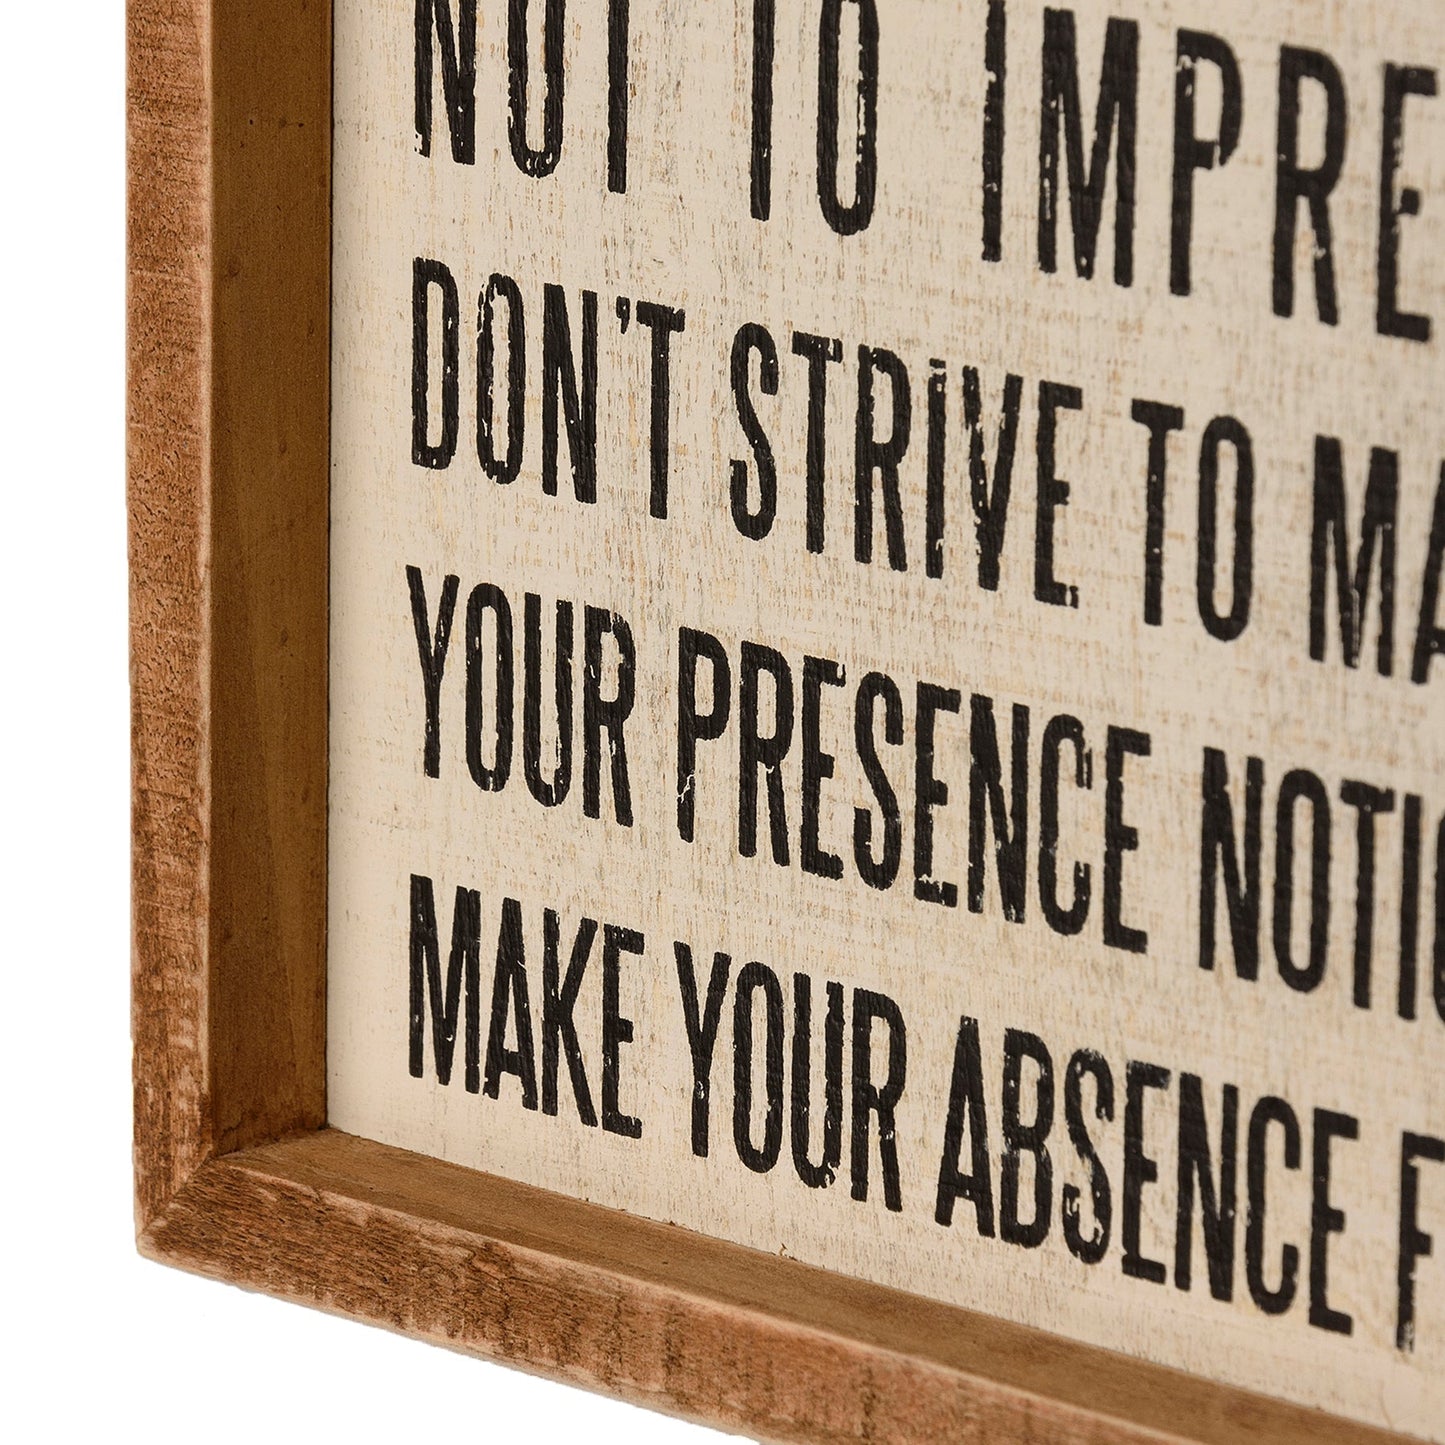 Last Call! Work For A Cause Inset Wooden Box Sign | Motivational | Rustic Home Decor